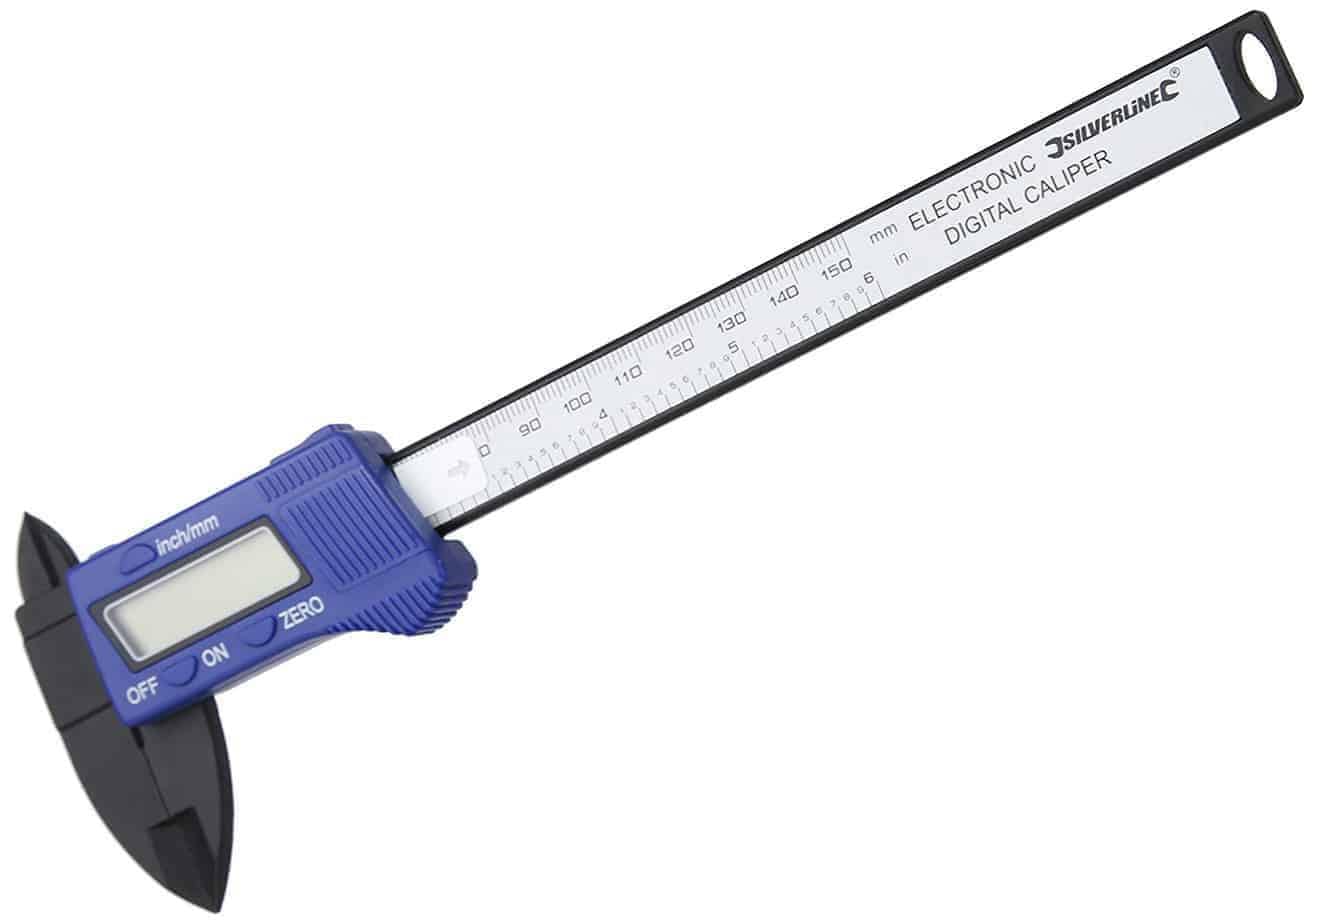 Composite Digital Vernier Calipers - Ring Turning Ring making cores, blanks, inlays and tools